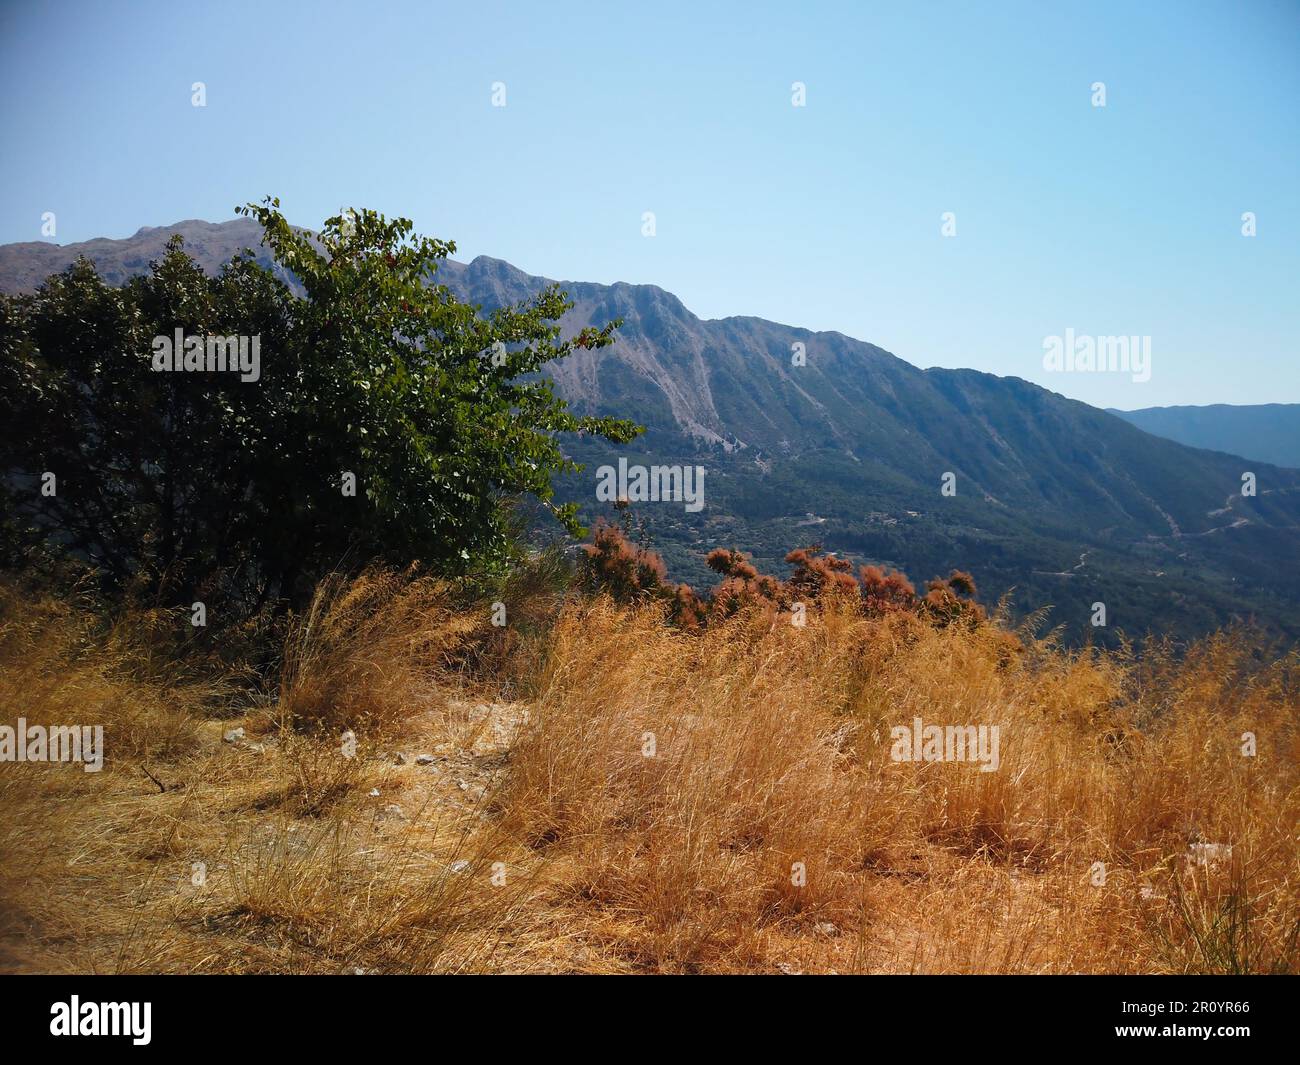 Late summer golden grass in the foreground with mountains in the background Stock Photo